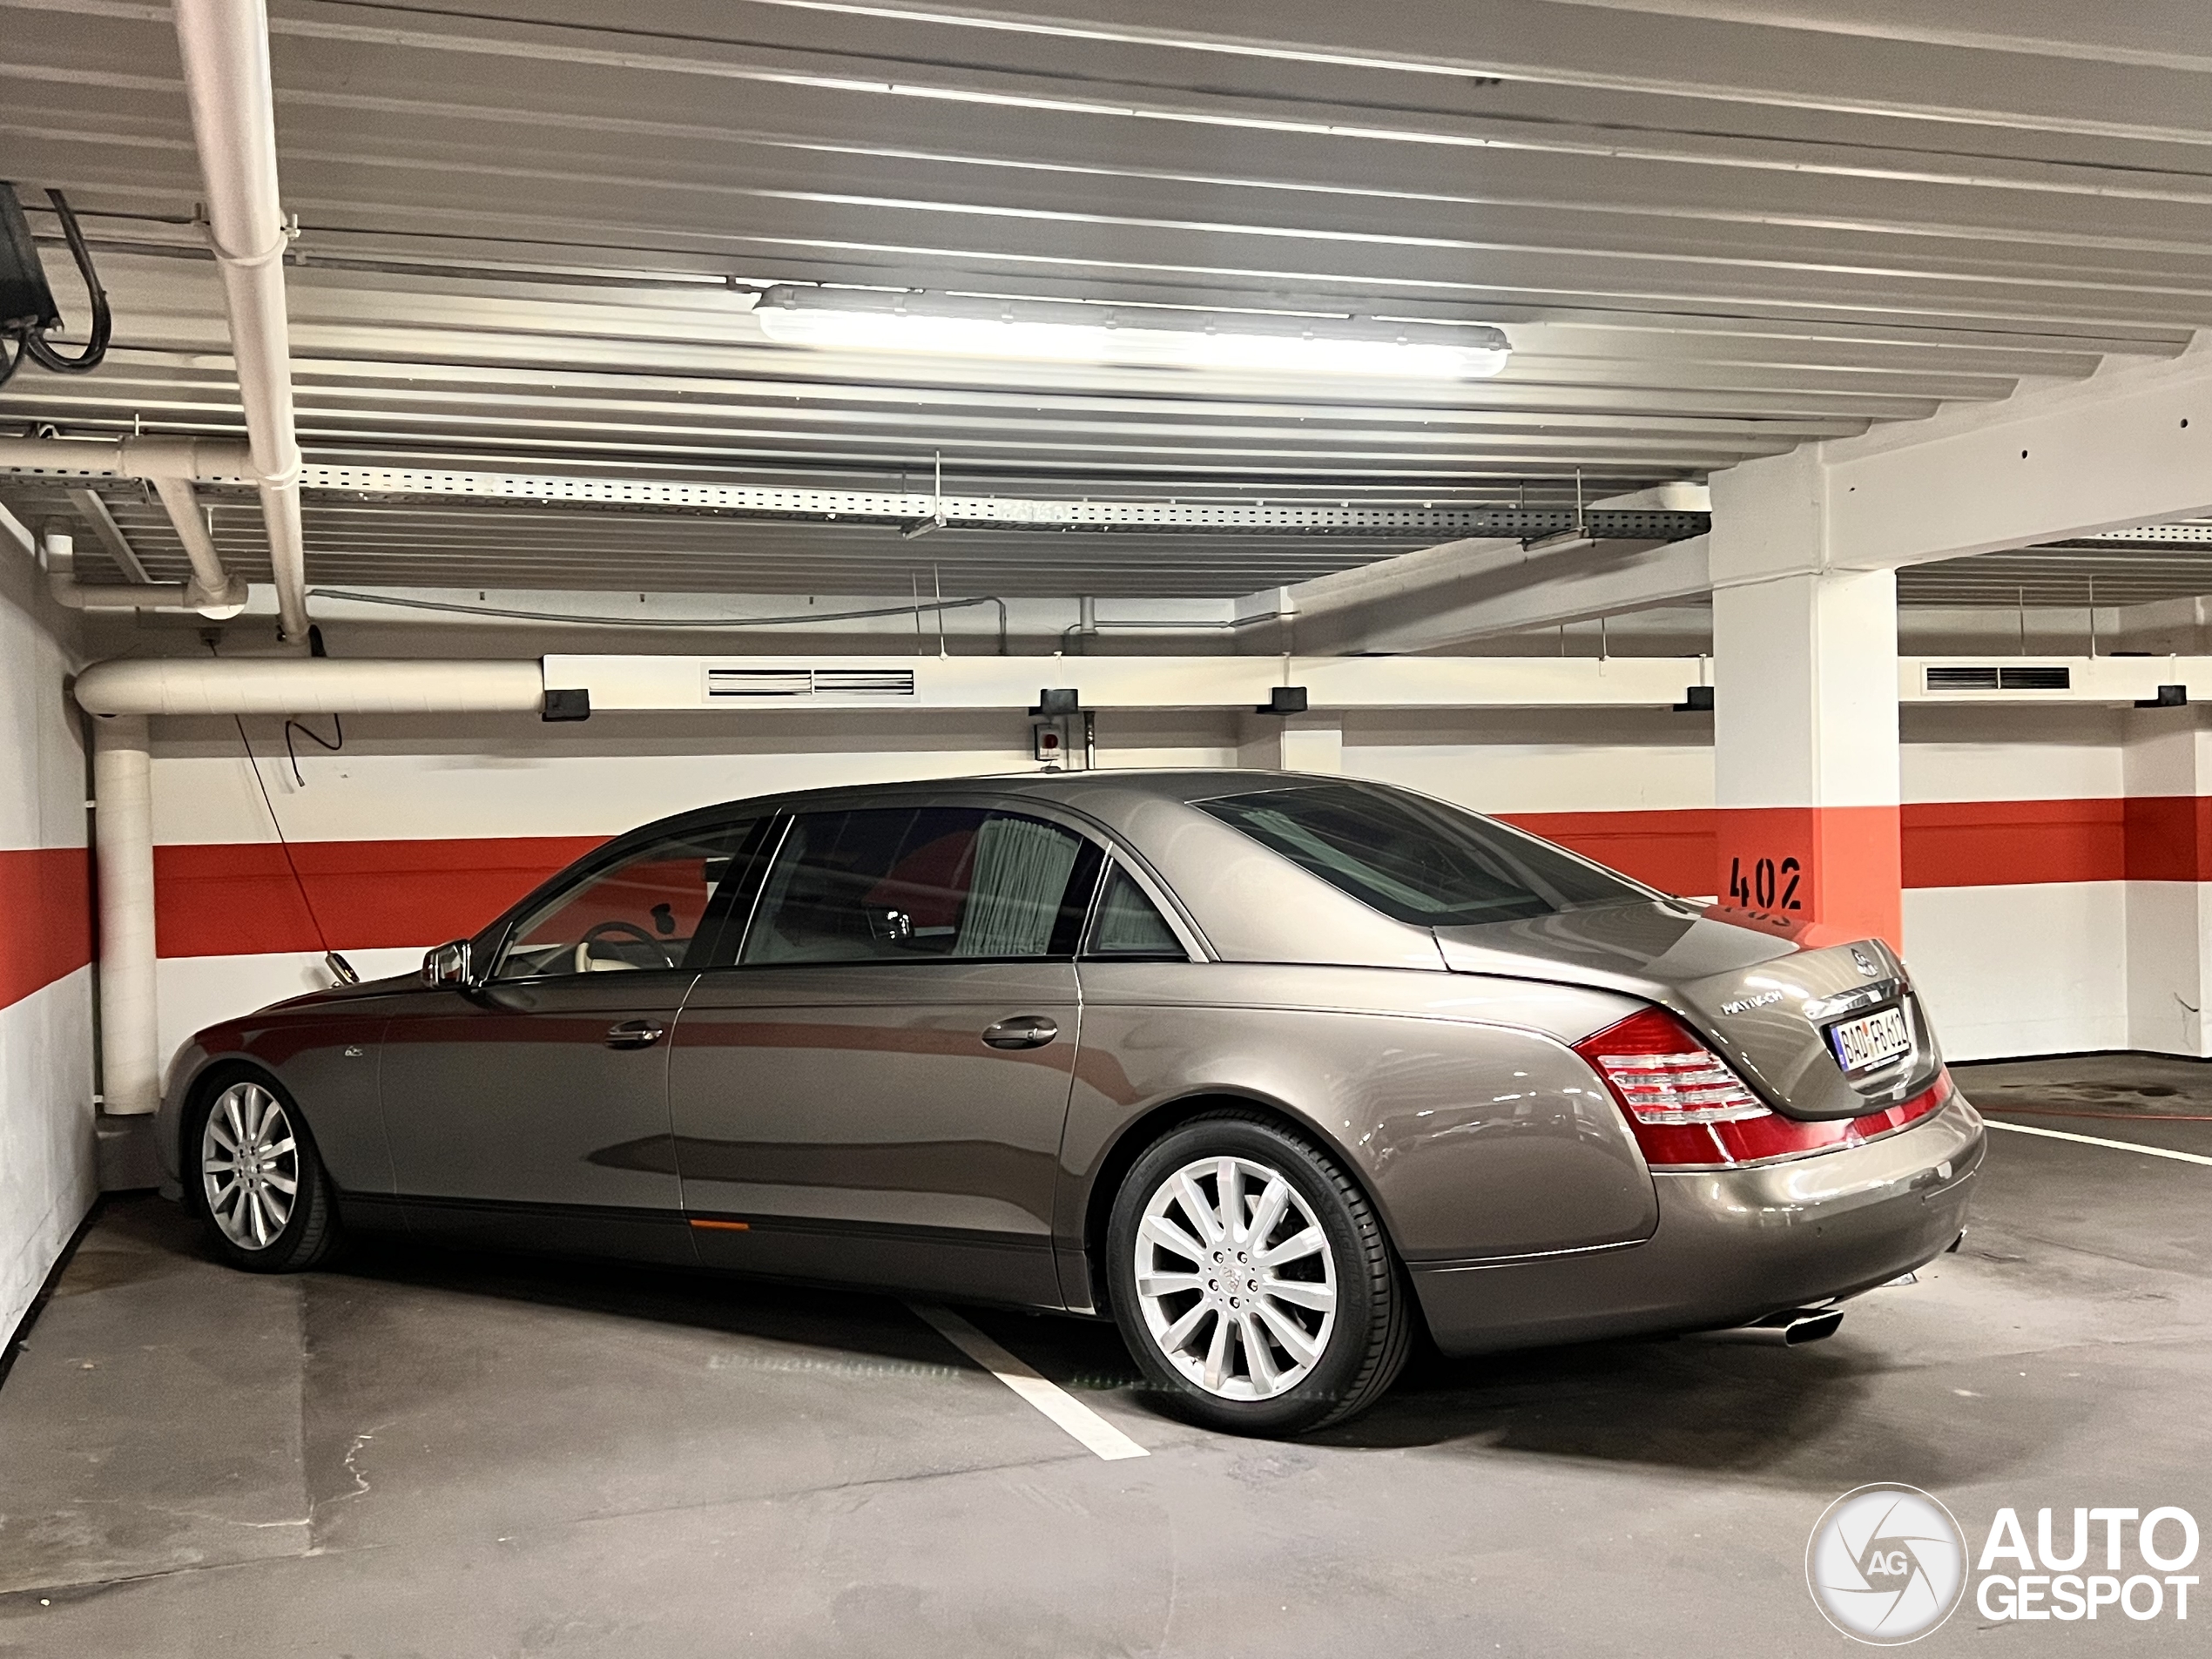 The Daily Challenges with a Maybach